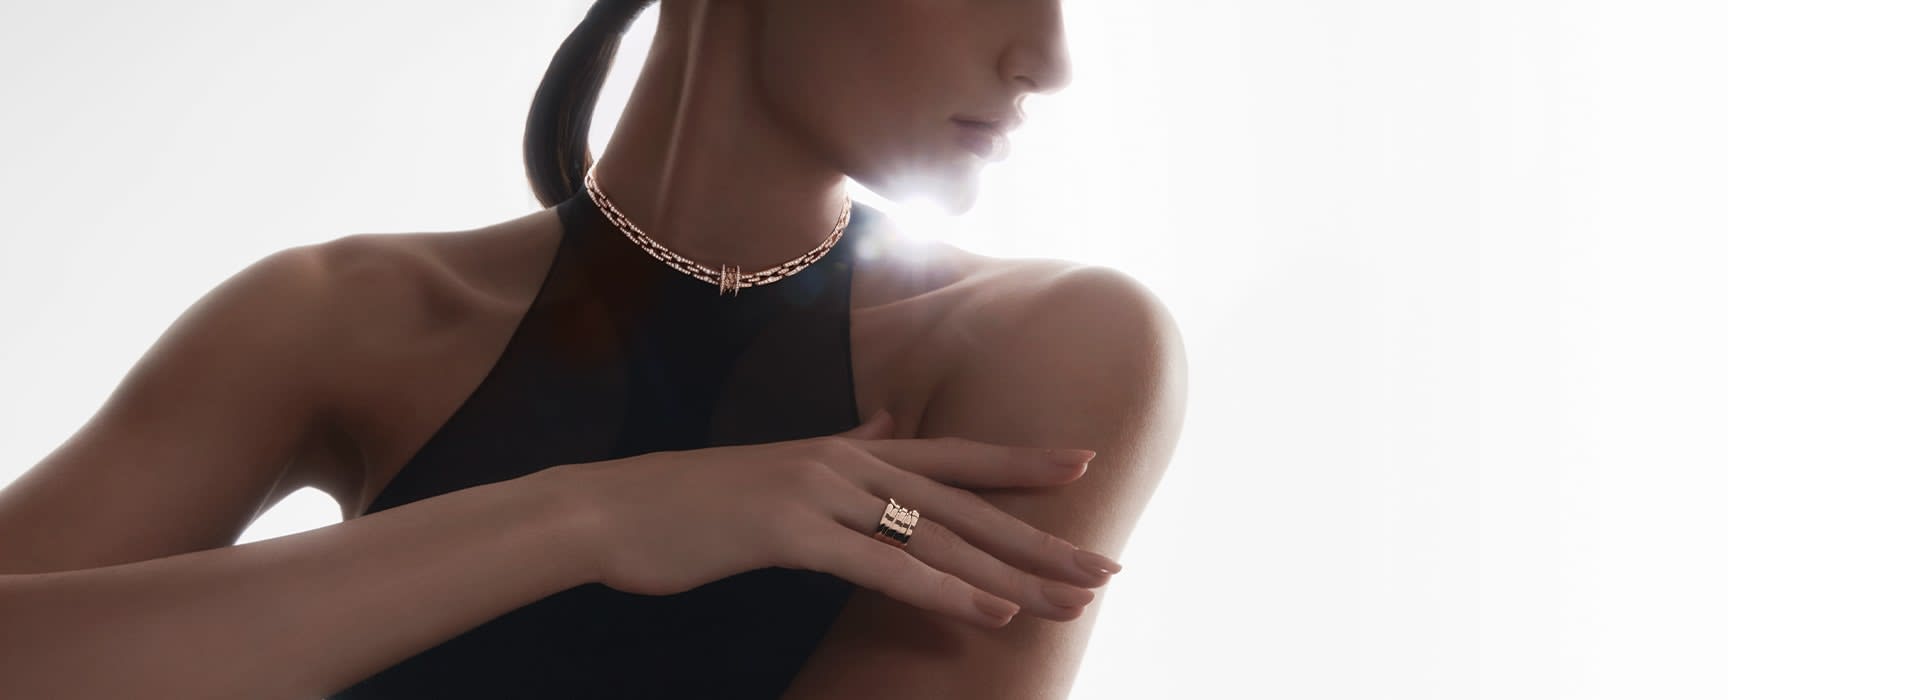 Model wearing multiple B.zero1 gold rings for the Bulgari Icons campaign.